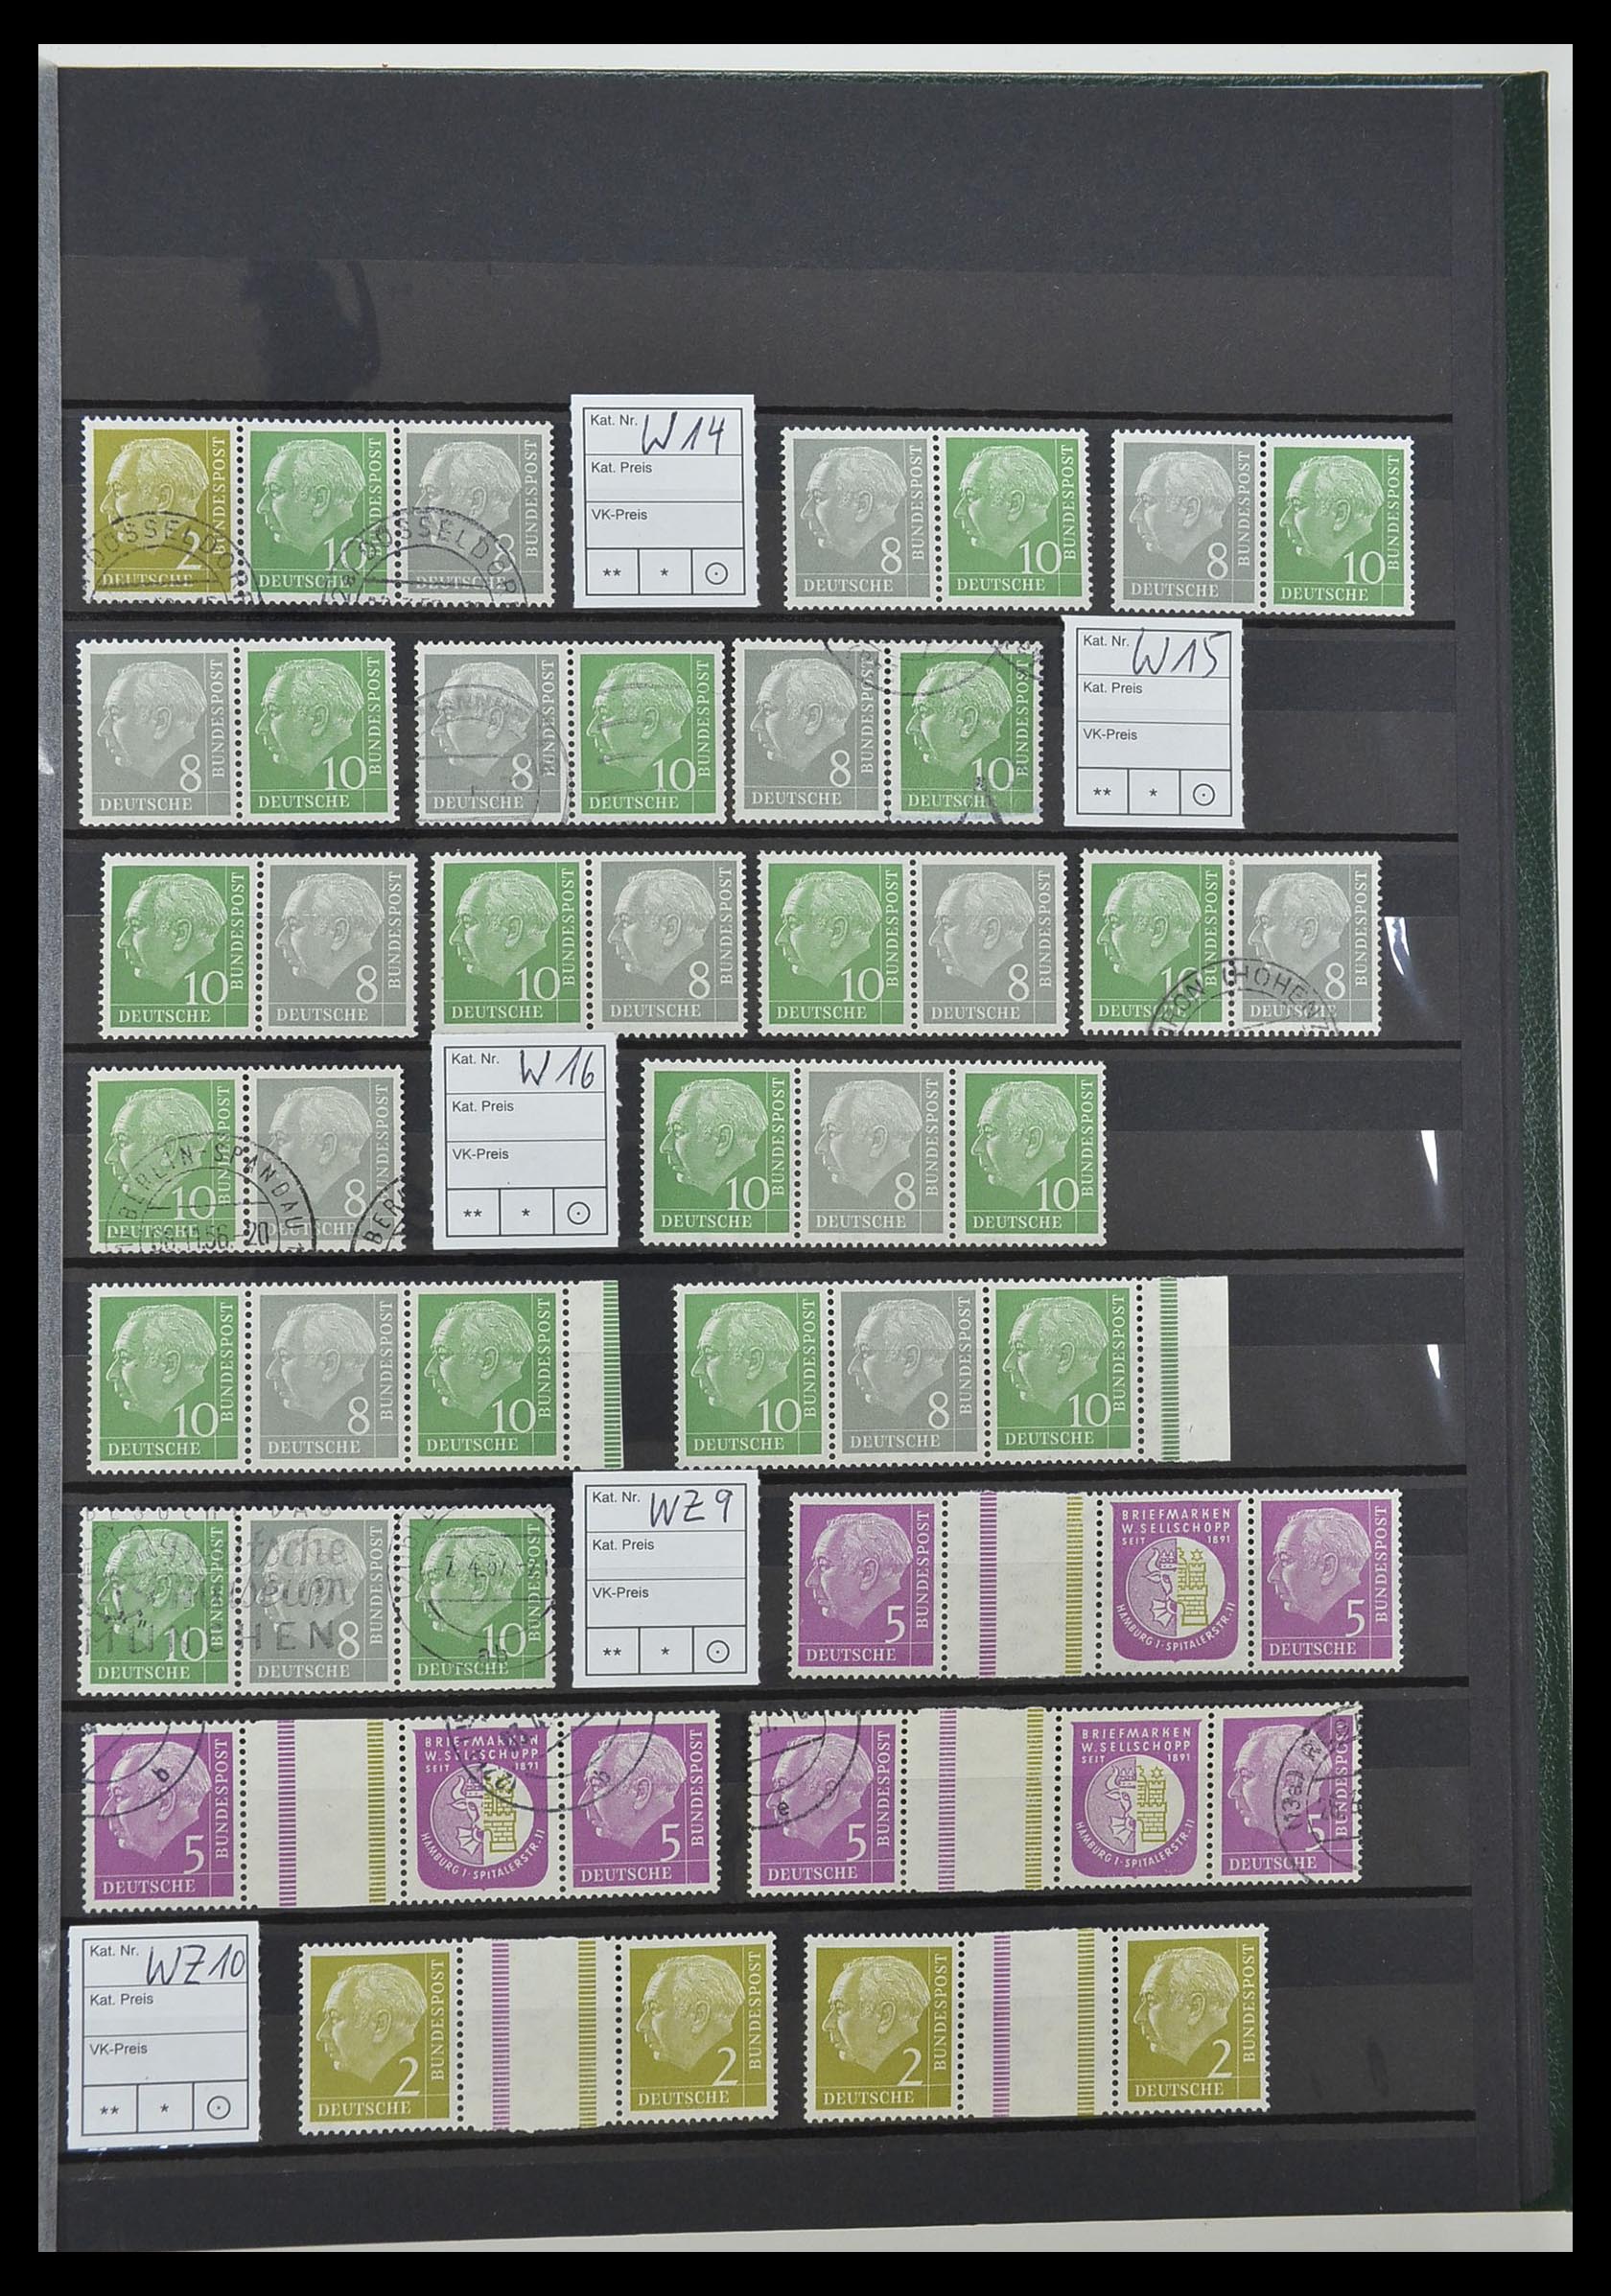 33275 043 - Stamp collection 33275 Bundespost combinations 1951-1960.